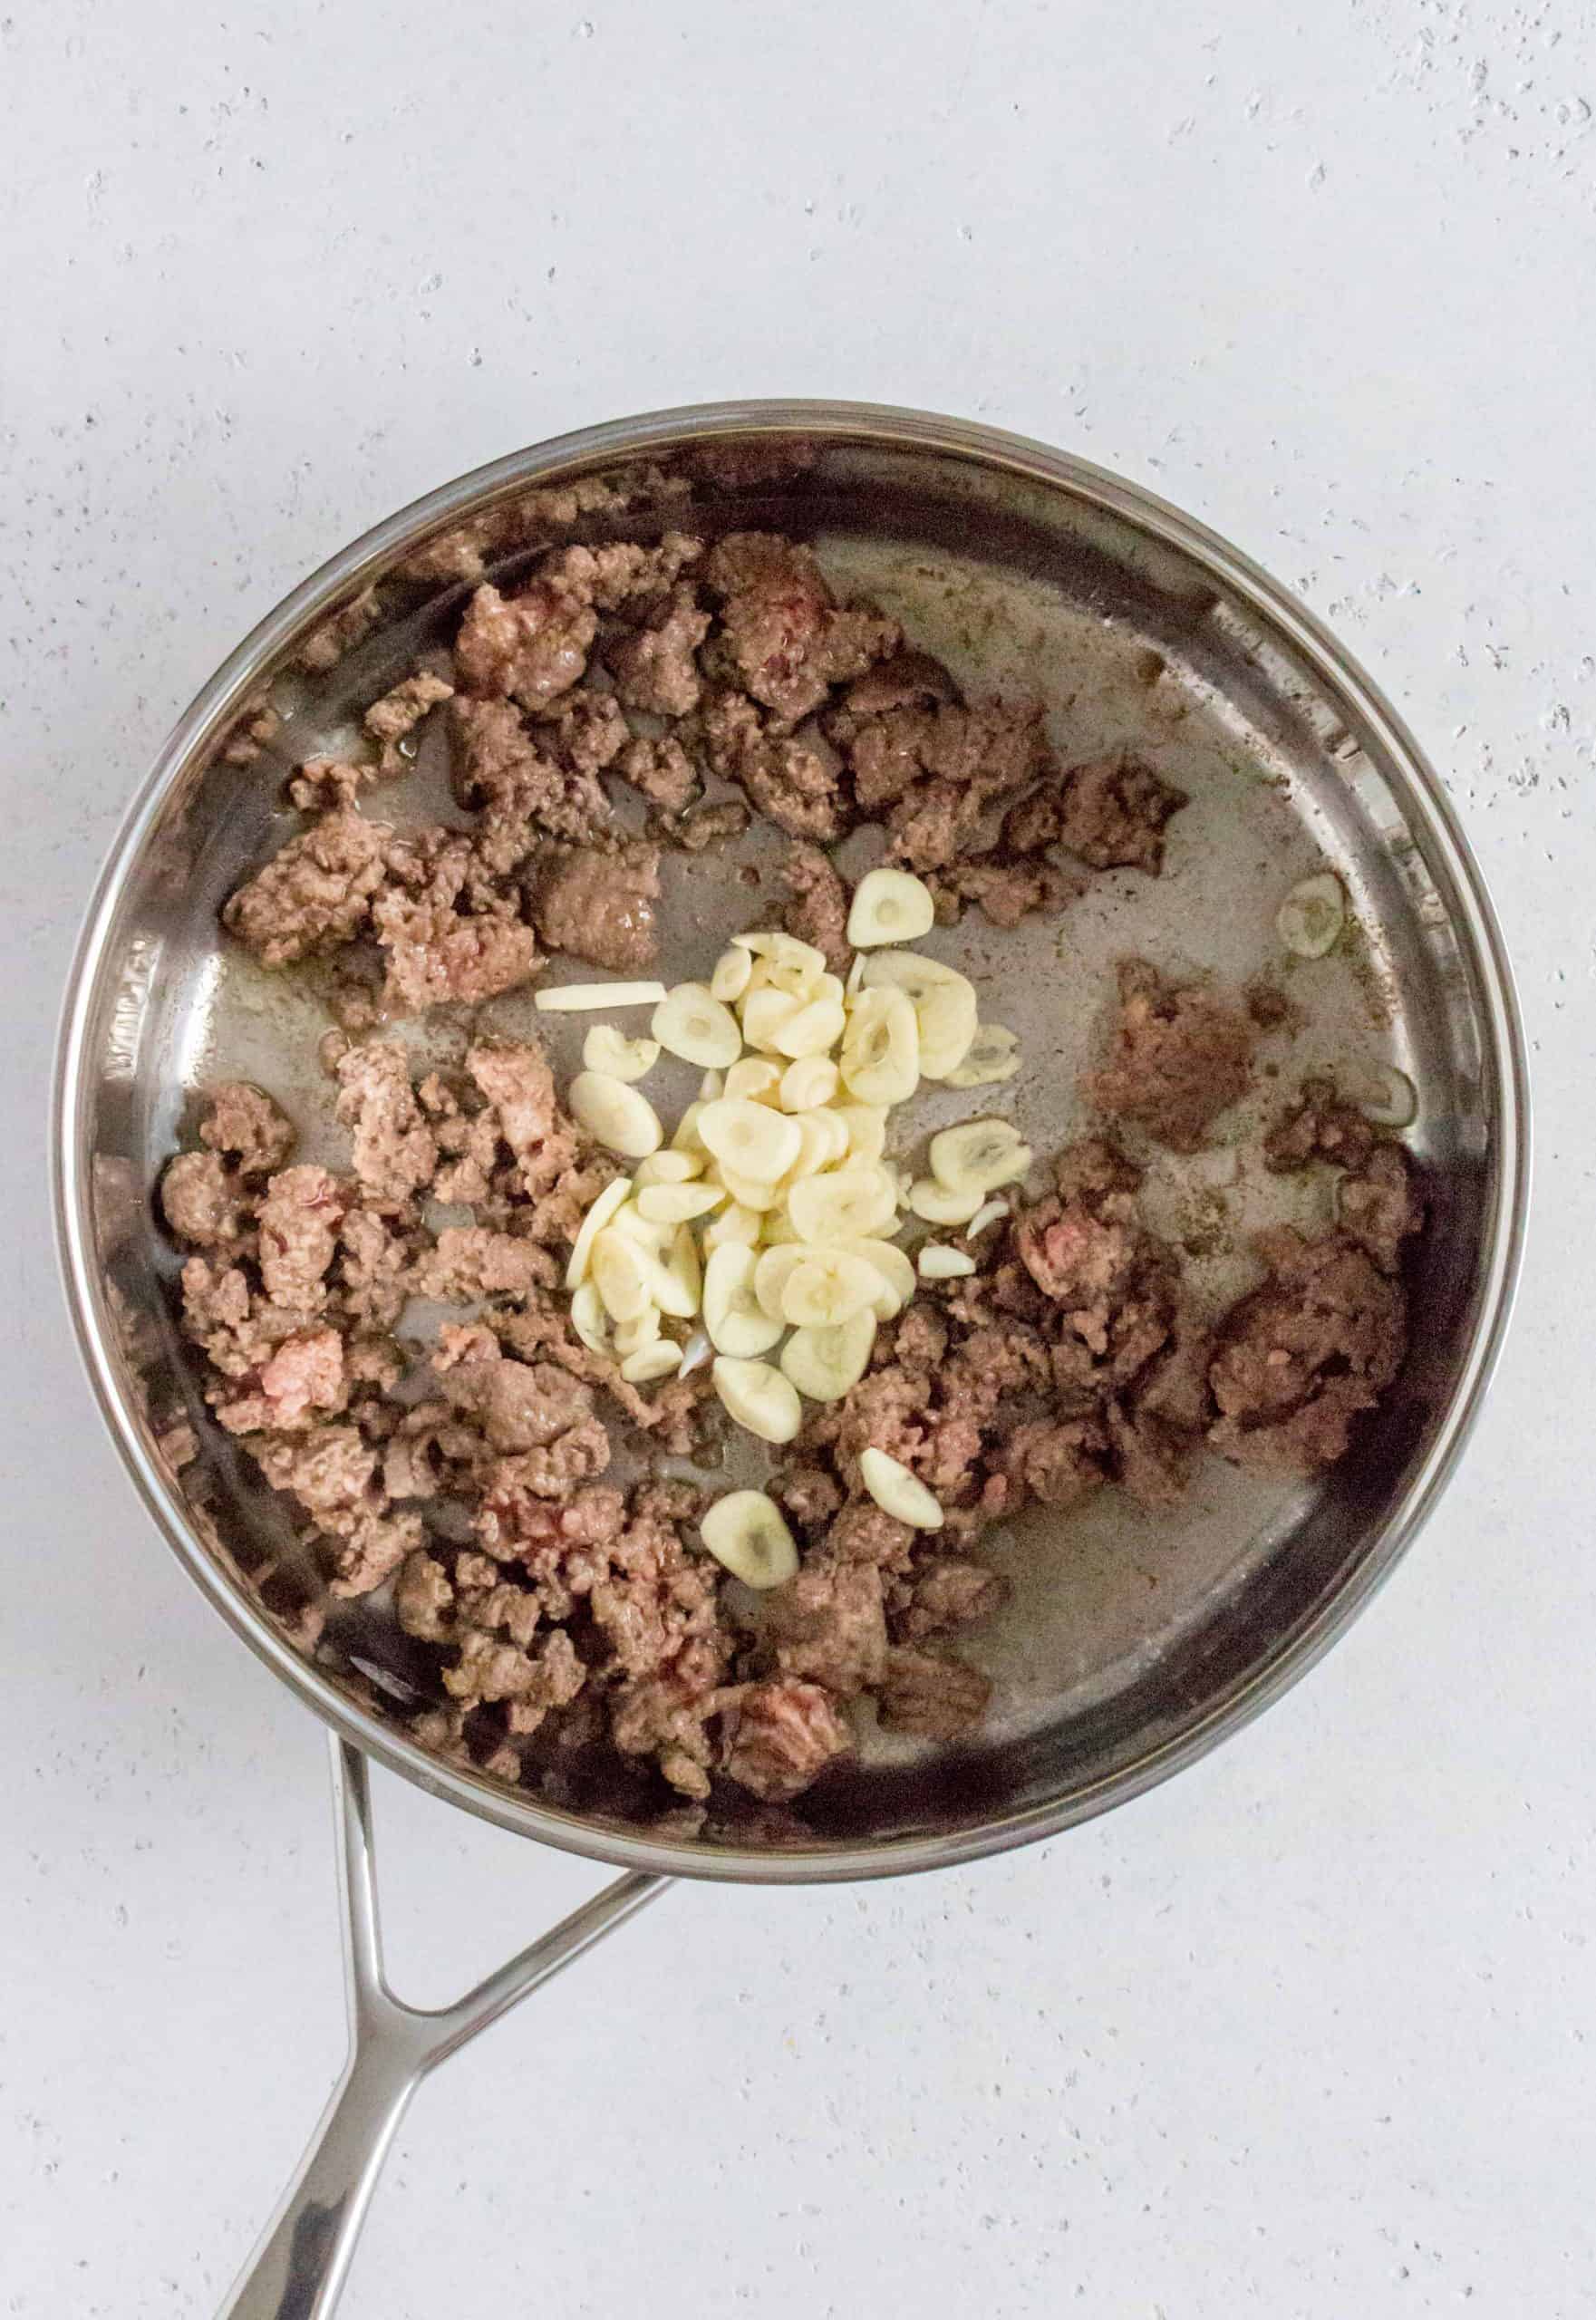 While the water is boiling, in a medium sized pan, melt your butter and start browning your ground beef, breaking it up with a wooden spoon as you go along. Once mostly, browned, add in the garlic and sauté.